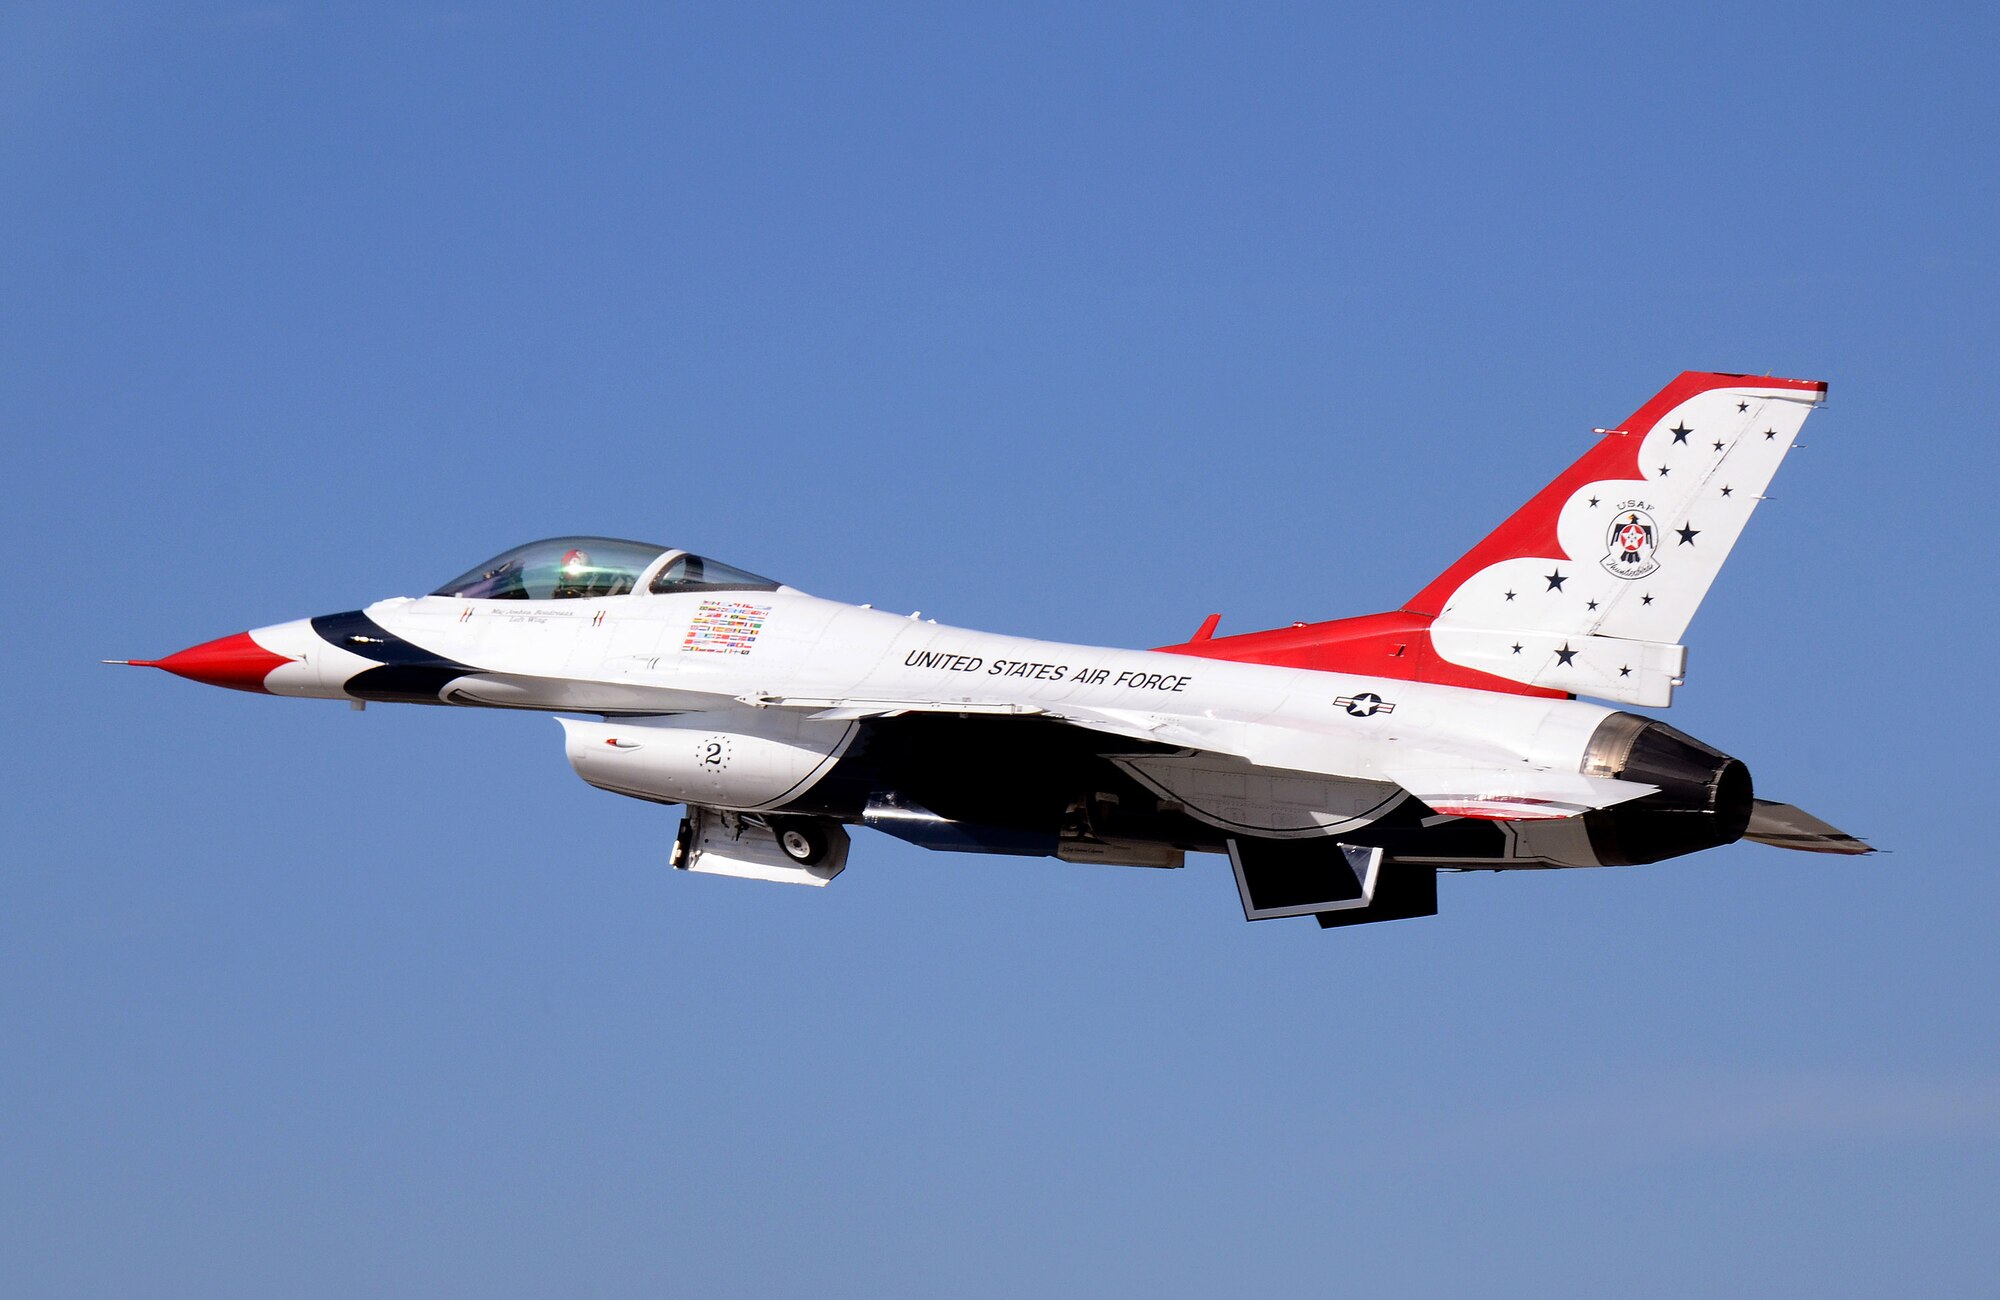 Thunderbird #2, Maj. Joshua Boudreaux, flying left wing in the diamond formation, departs Dobbins Air Reserve Base for the Wings Over North Georgia air show Oct. 18, 2014. The USAF Air Demonstration Squadron Thunderbirds are using Dobbins as their base of operations for their performances at the air show this weekend at the Russell Regional Airport in Rome, Georgia. (U.S. Air Force photo/ Brad Fallin/Released)